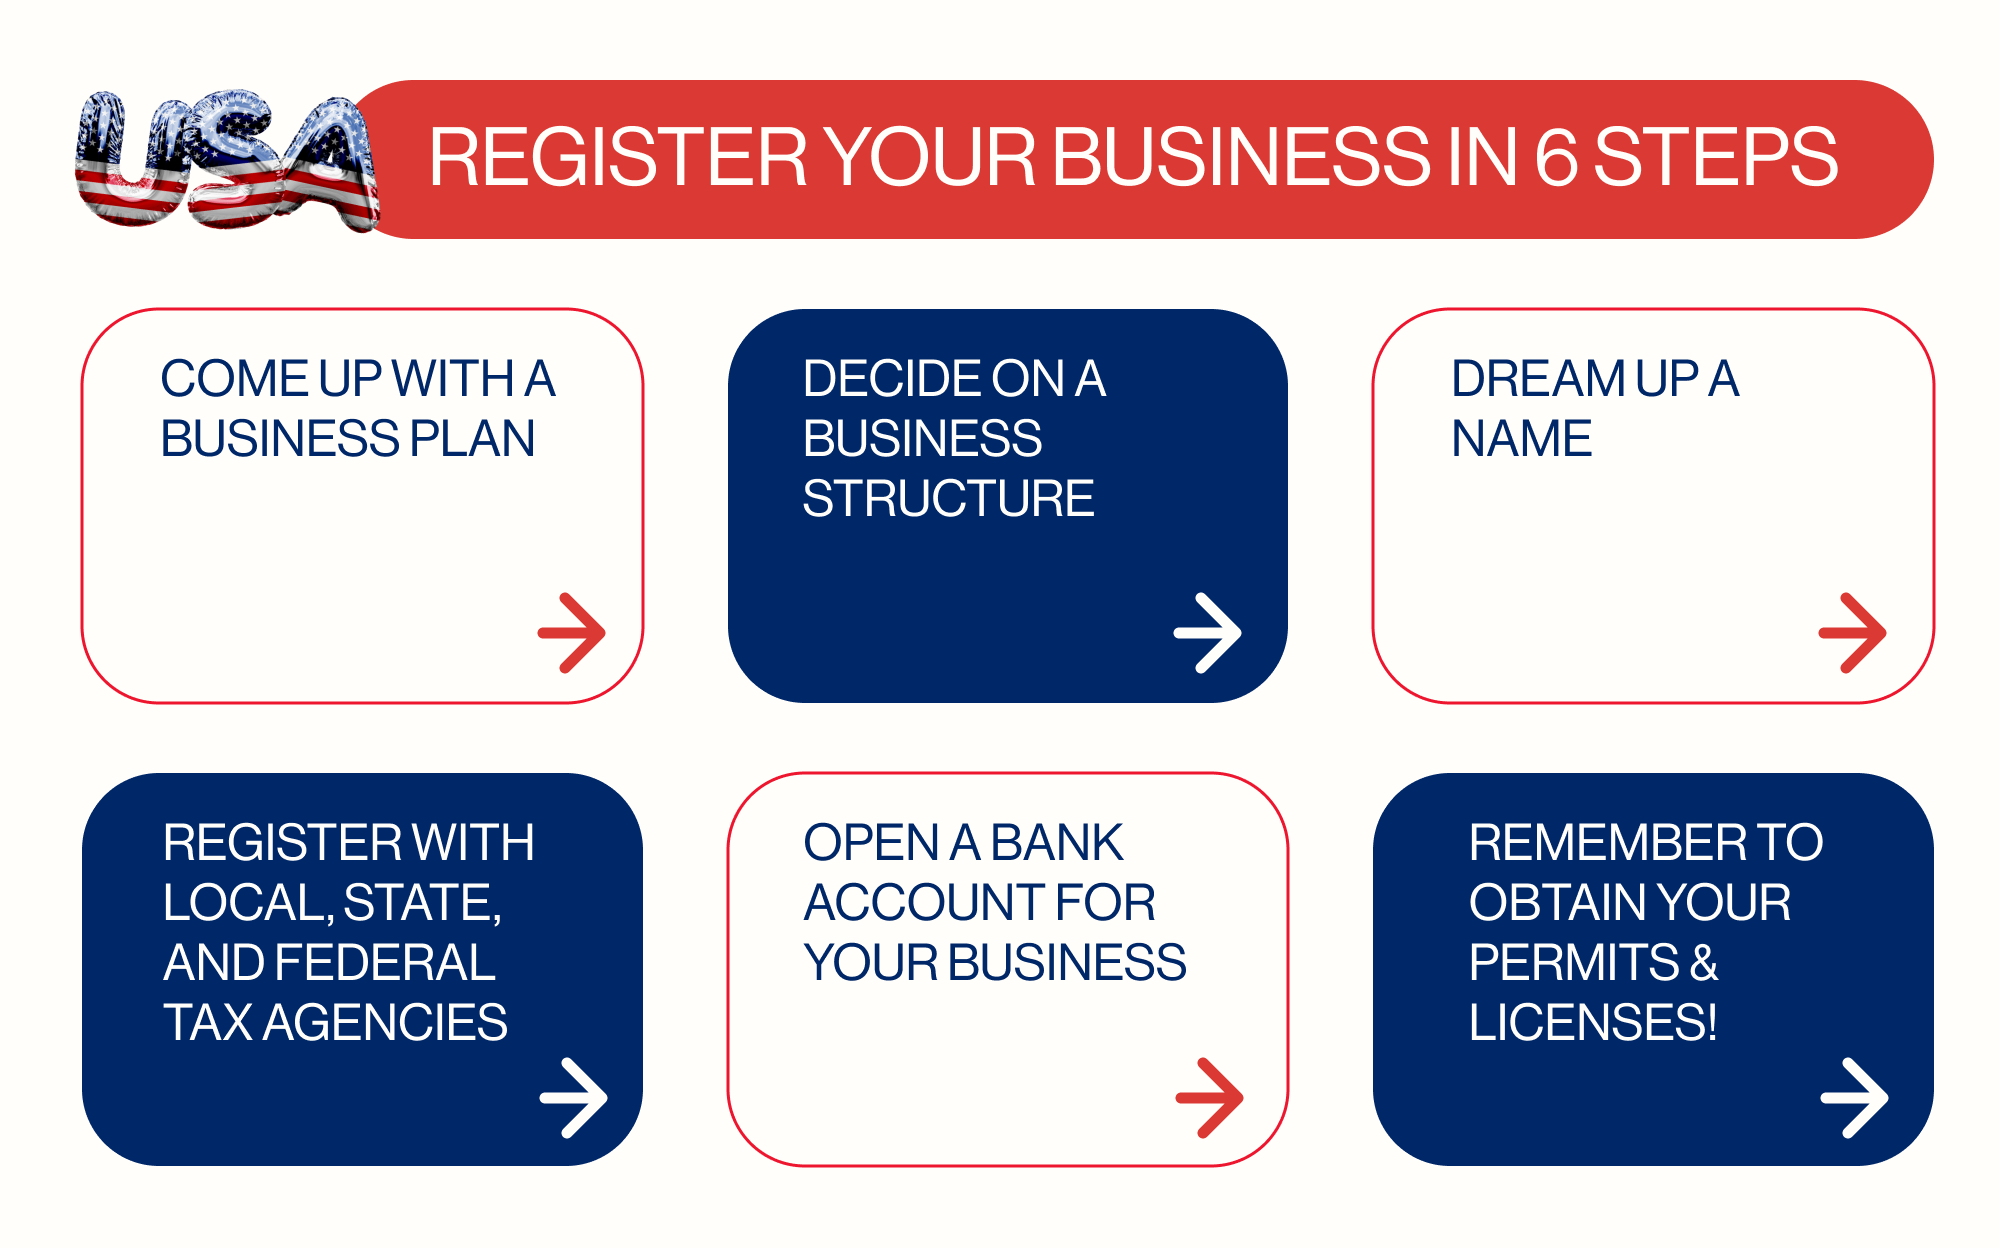 6 steps to register your business in the US